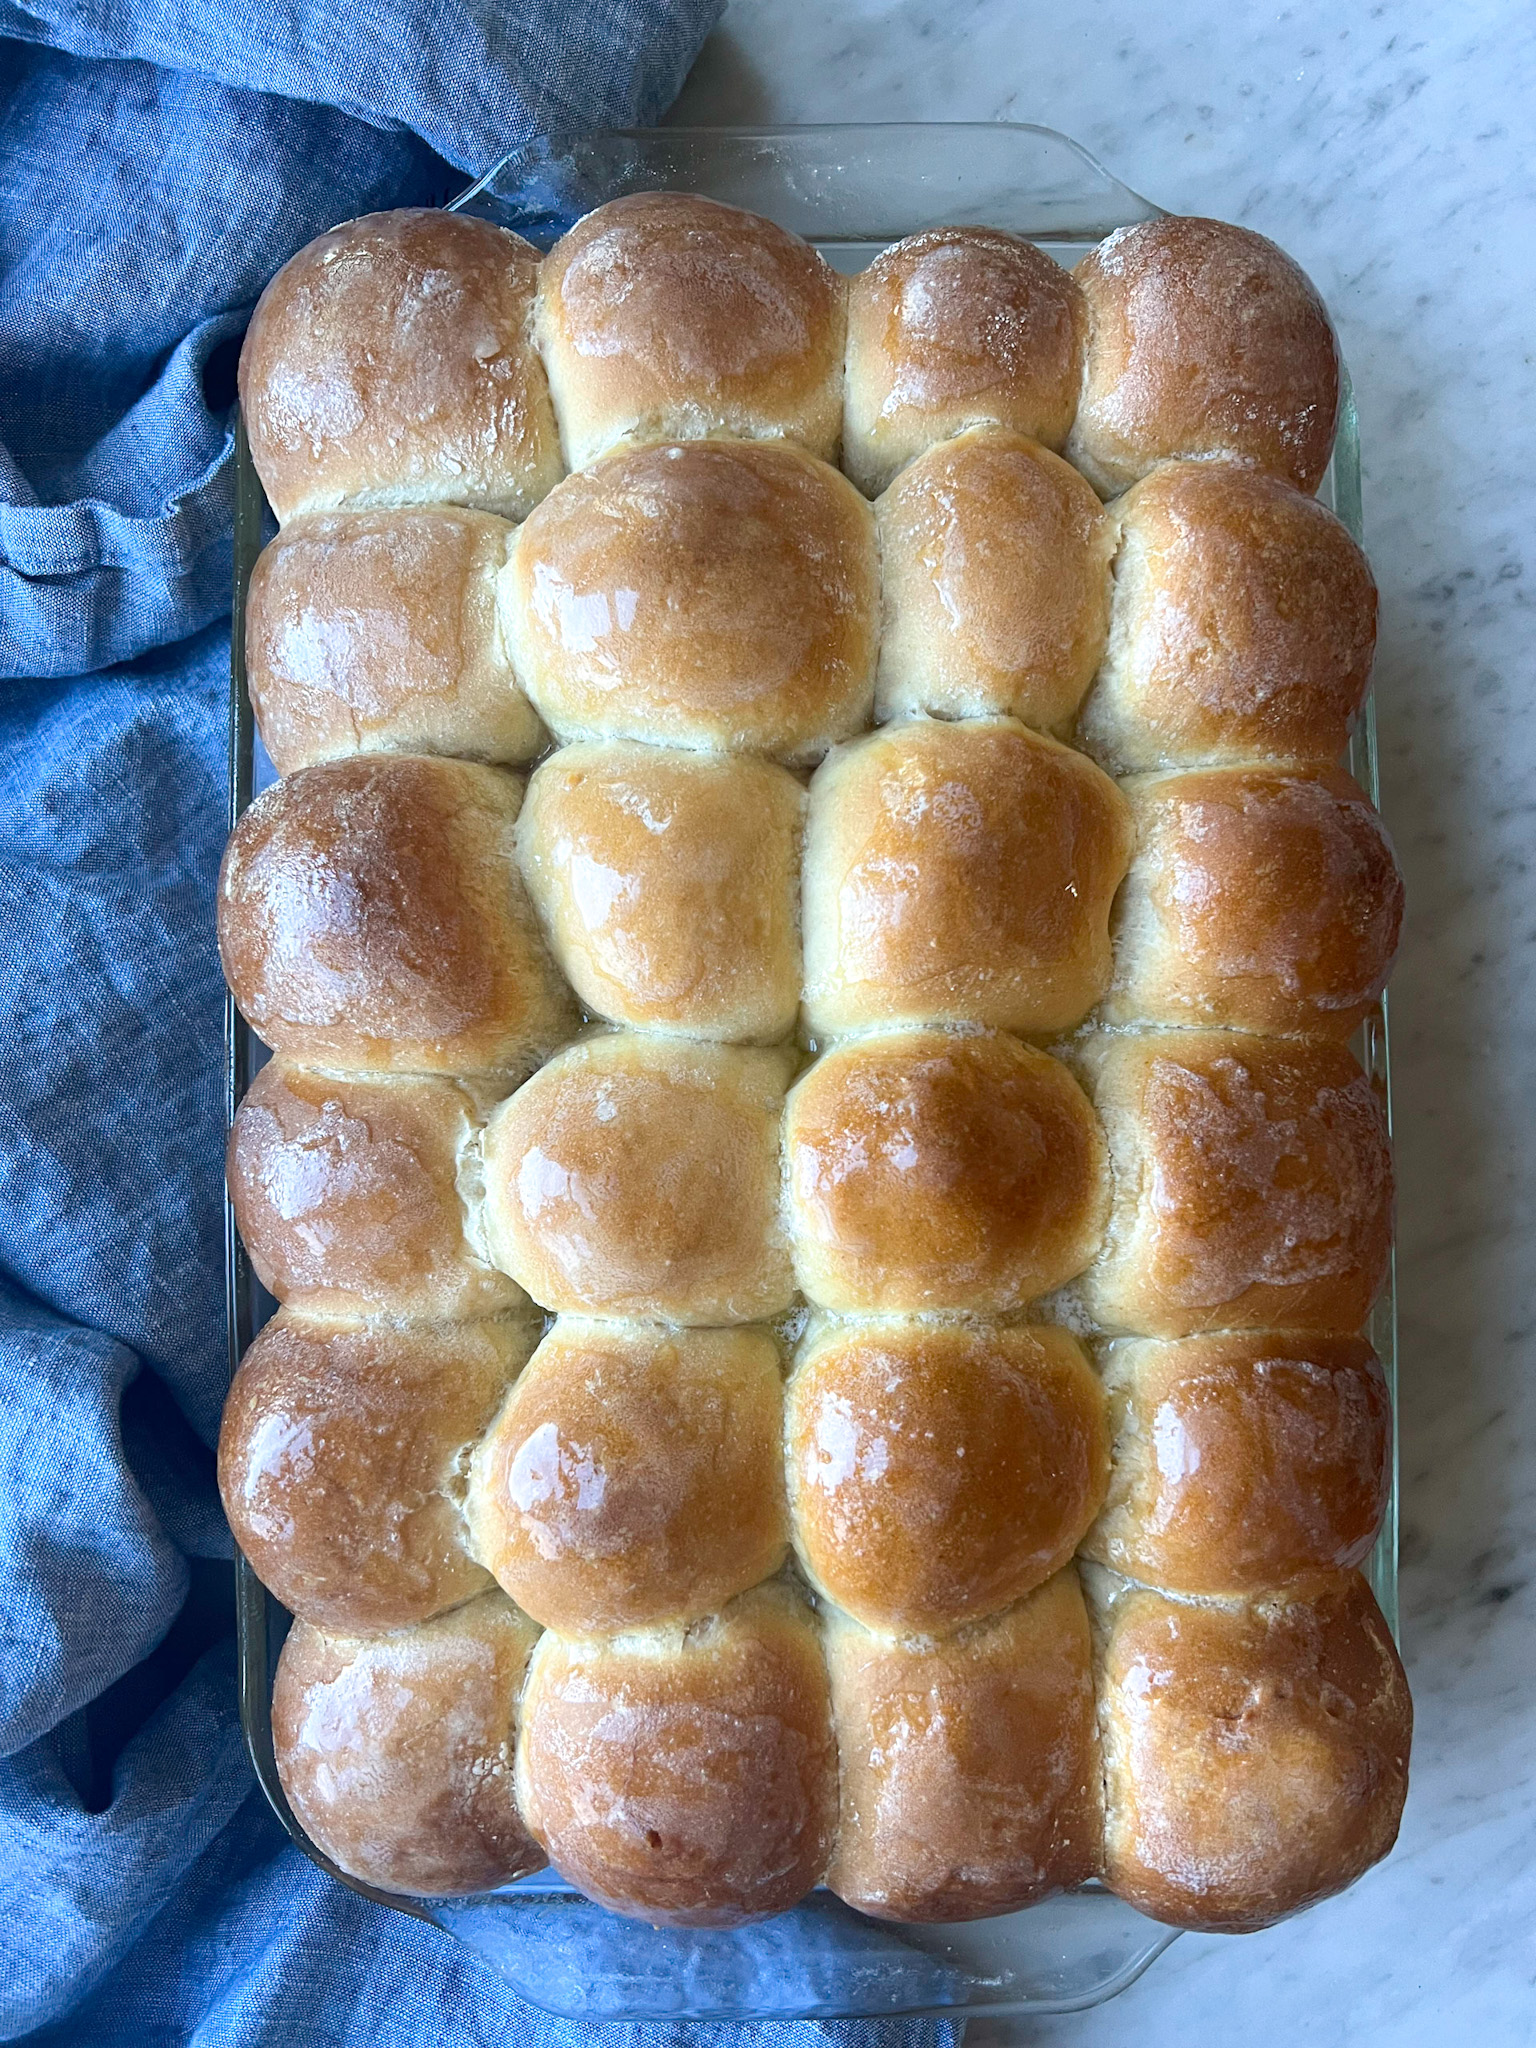 baked rolls with butter over the top and a blue towel